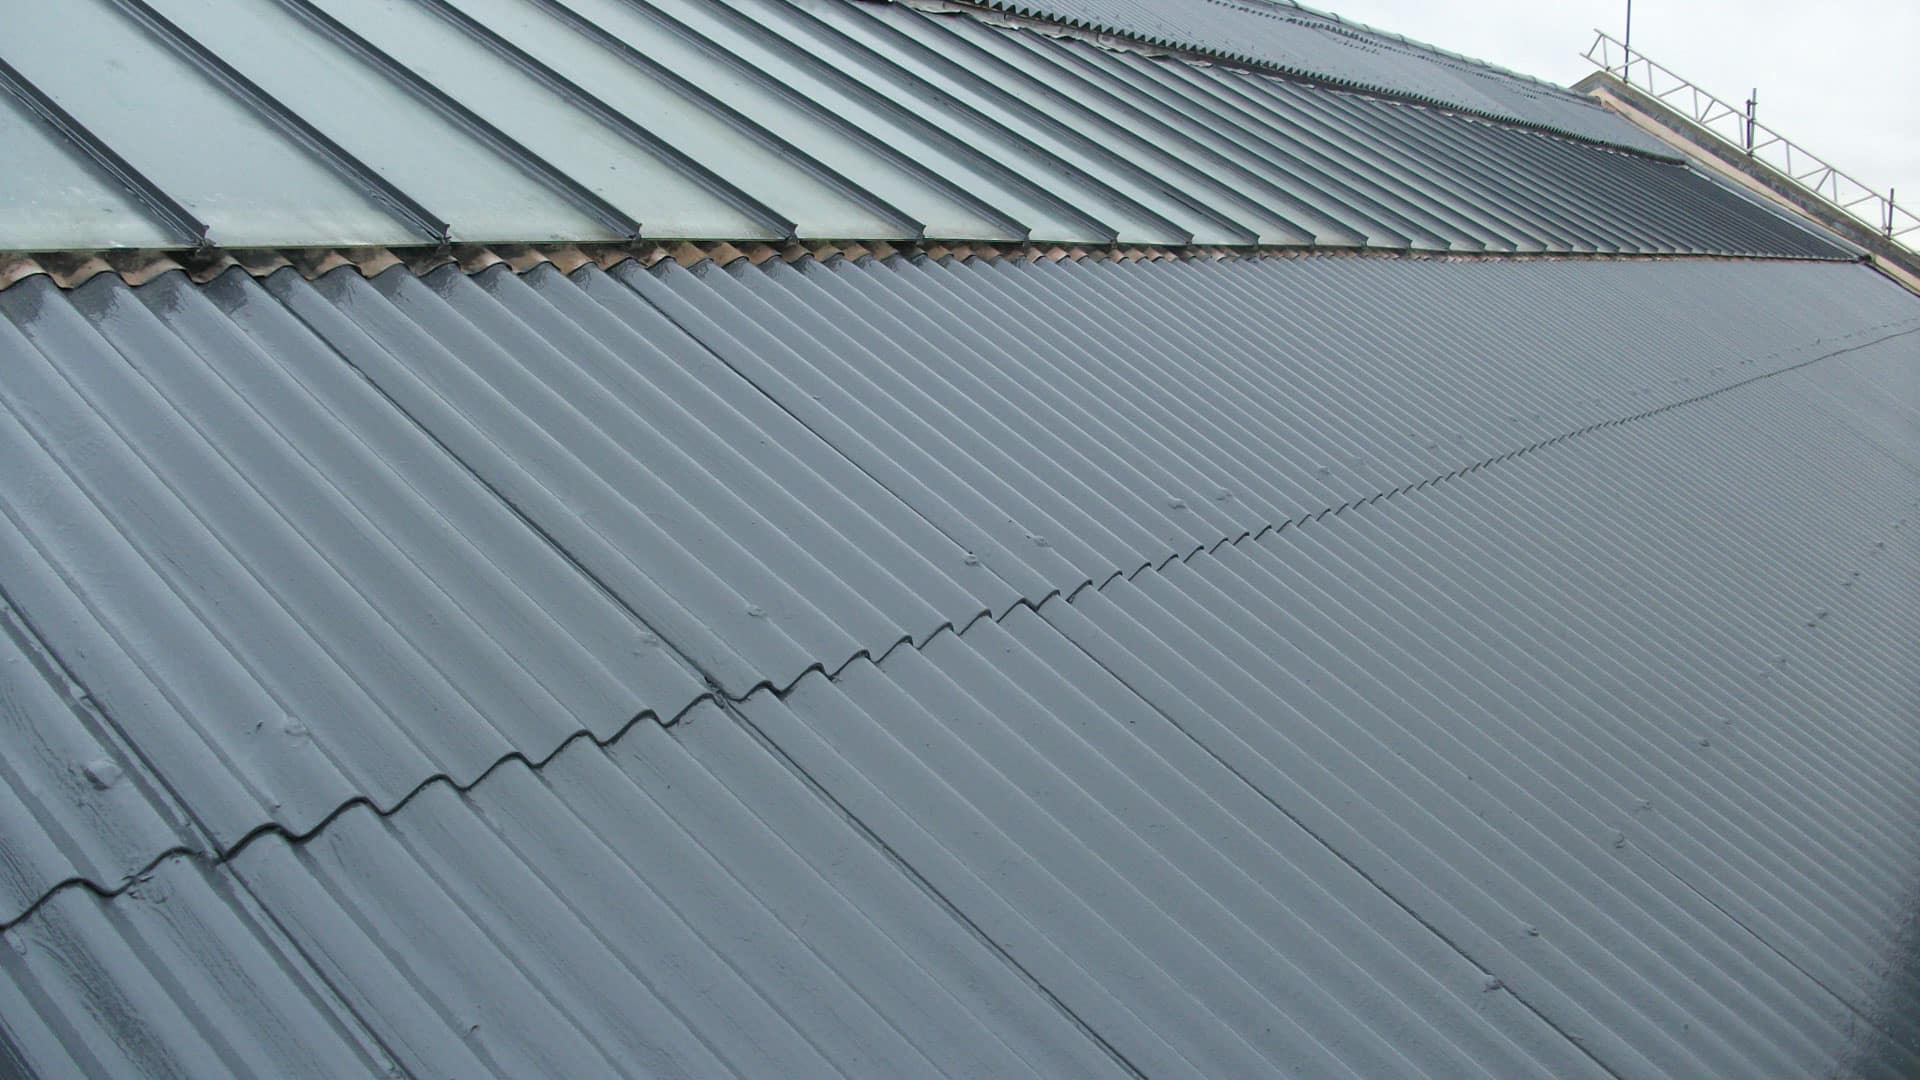 What Makes Dura-Coat Roof Coating A Right Choice?